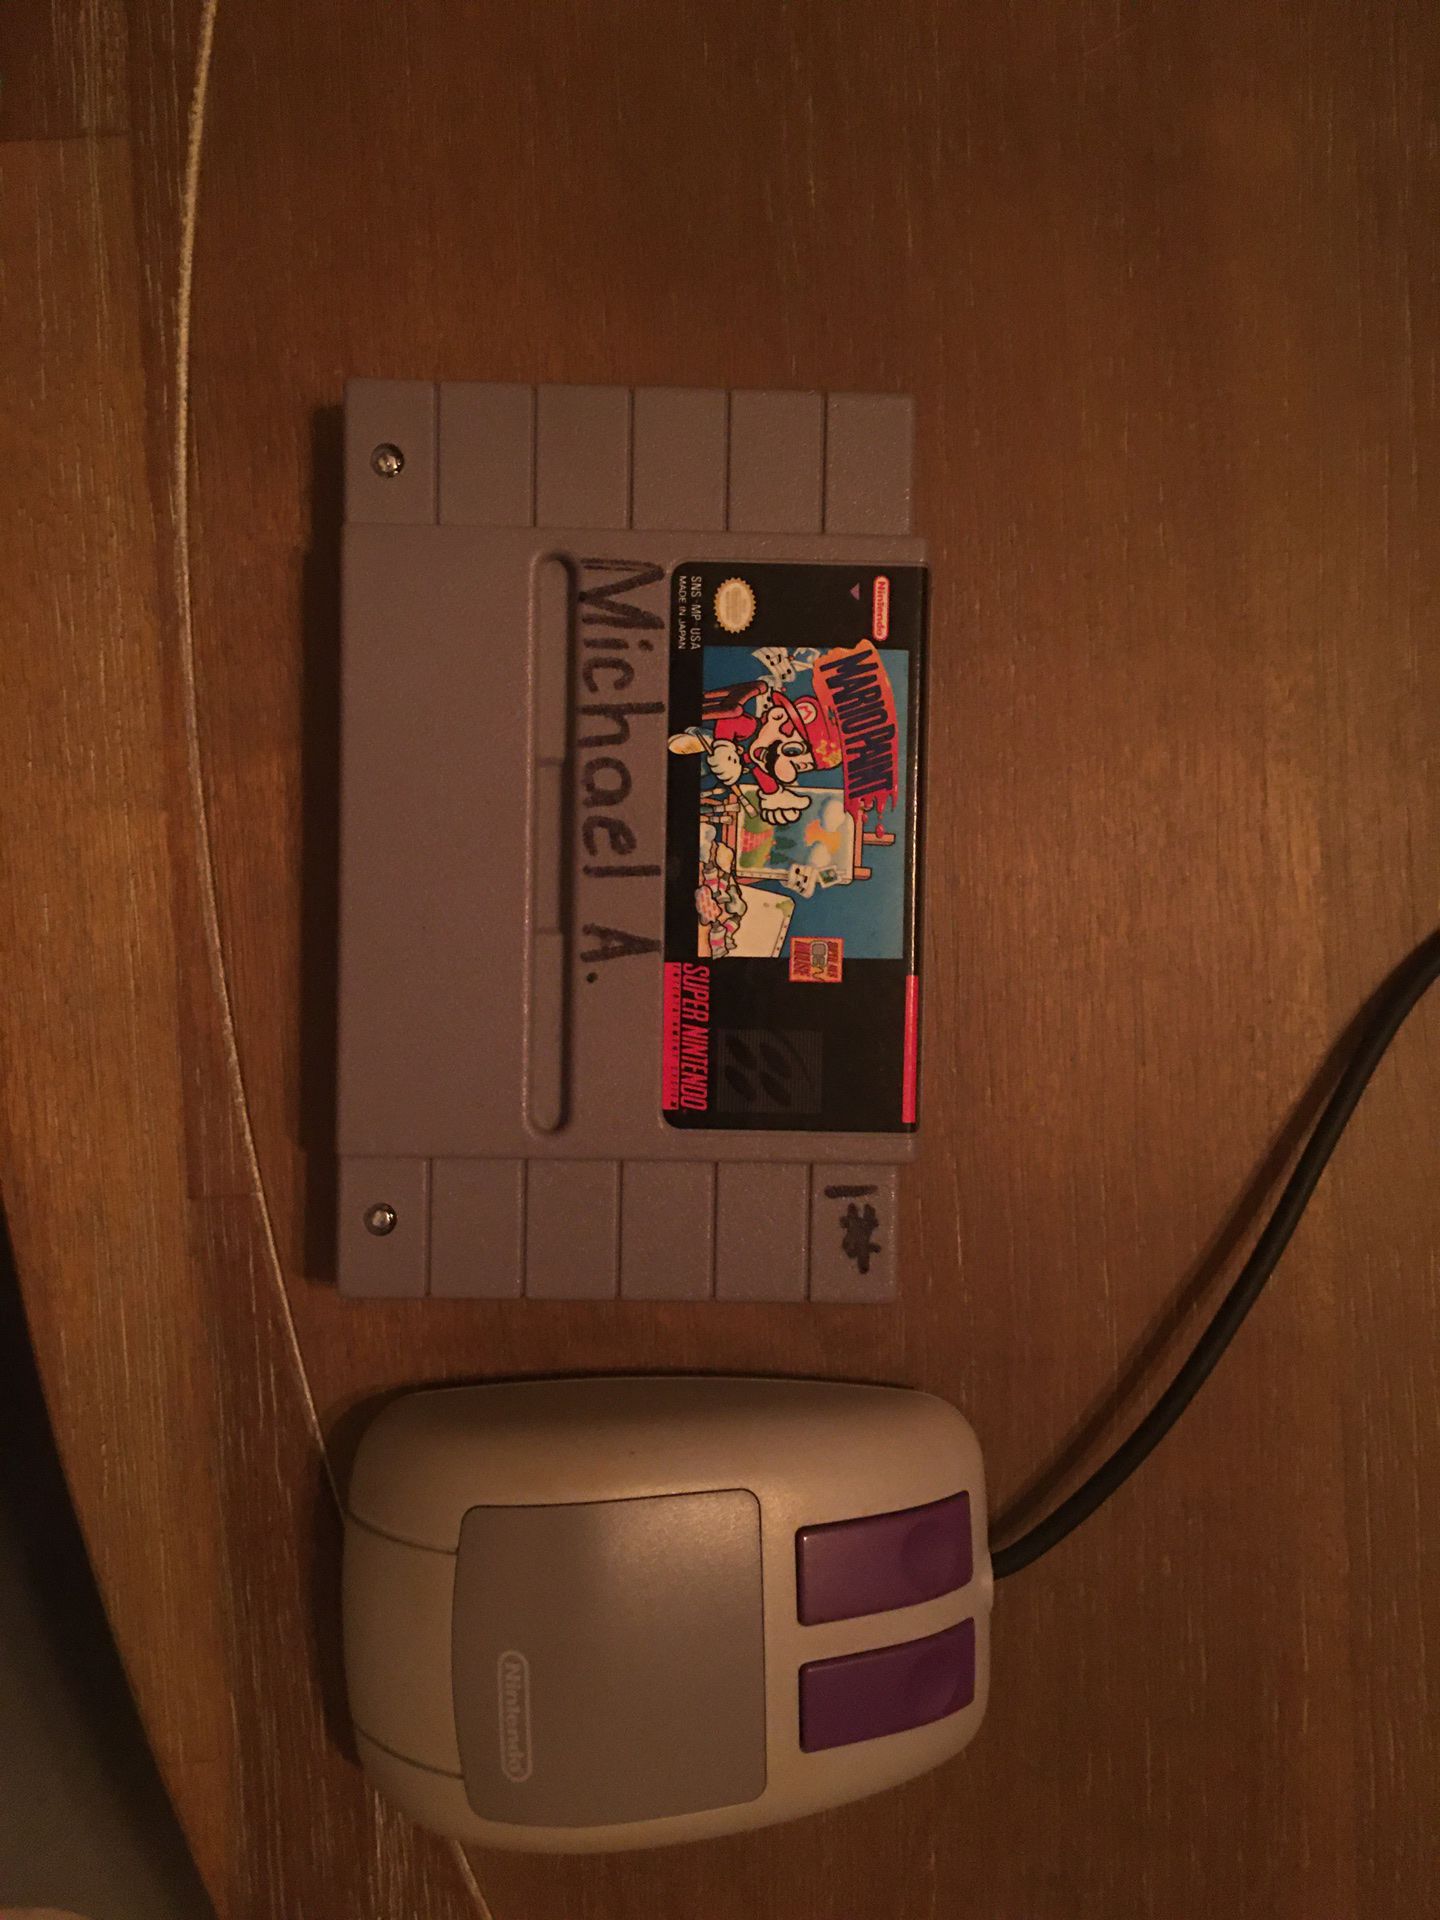 Super Nintendo Mario paint with mouse